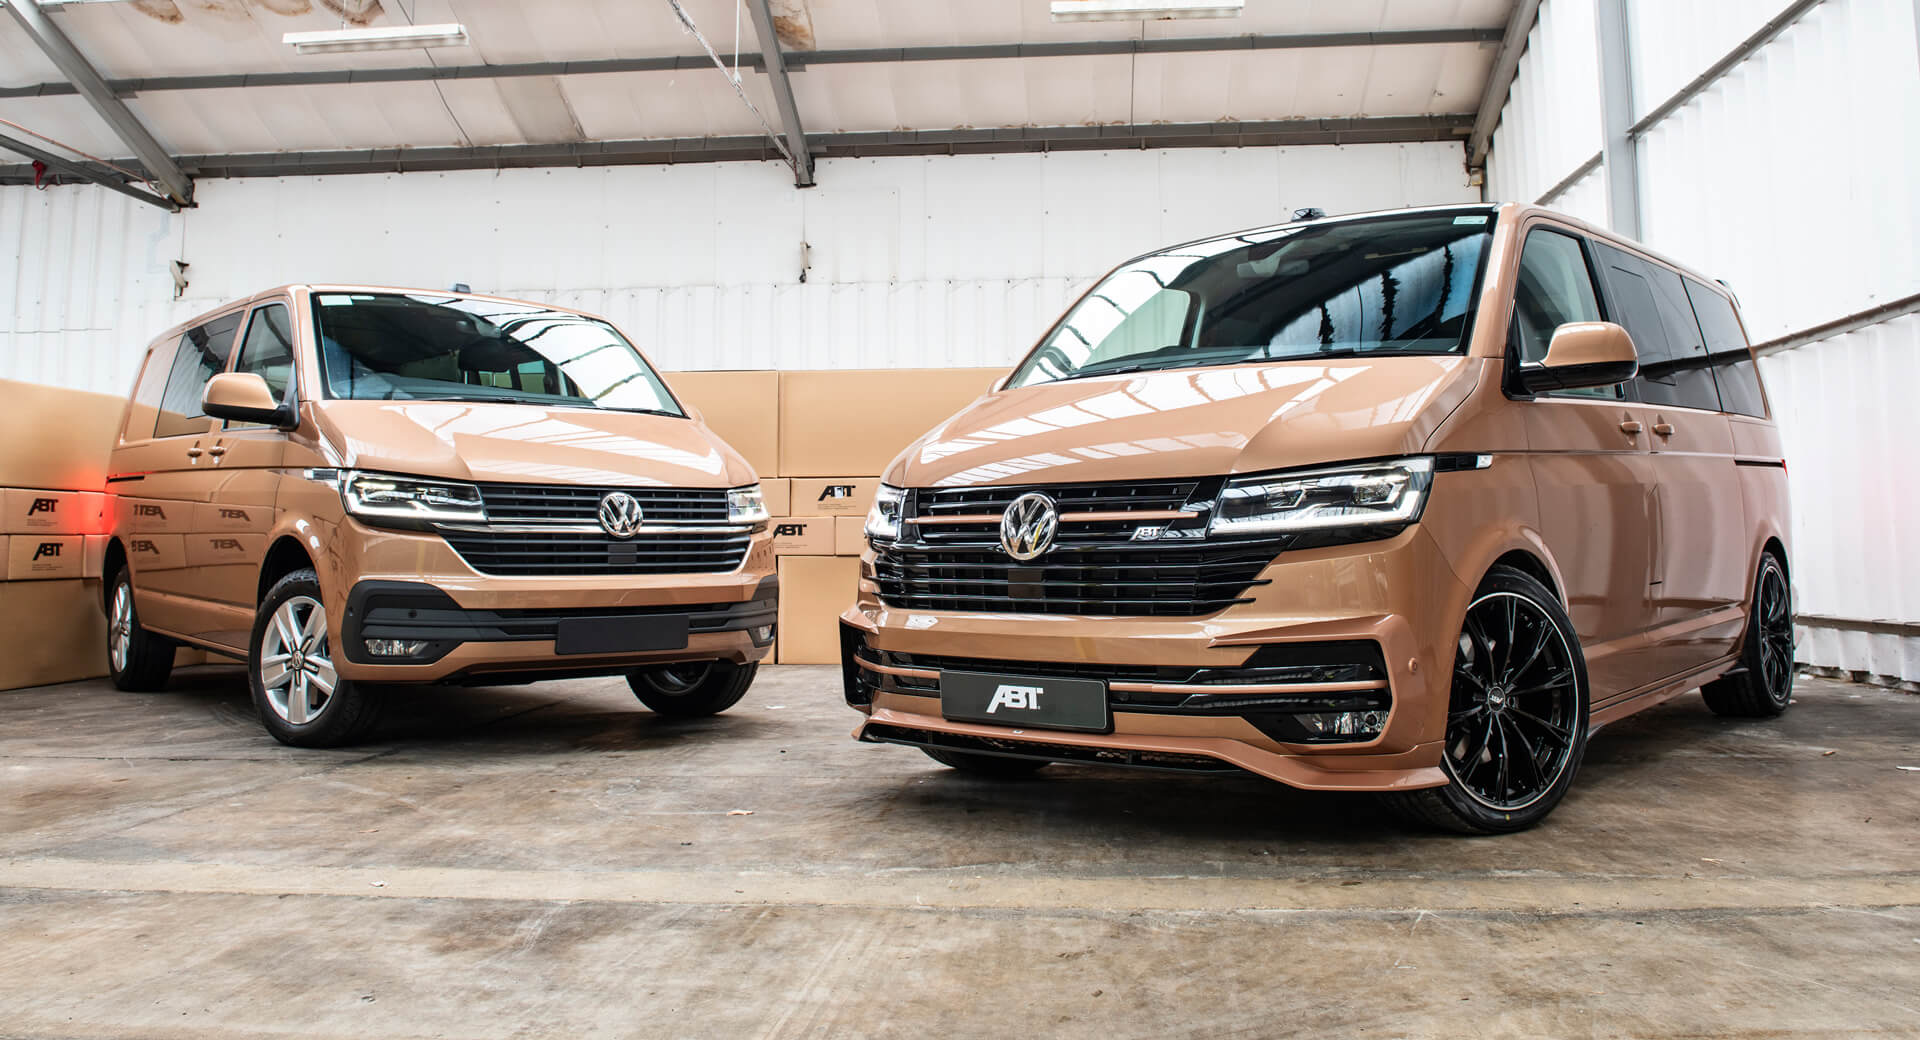 Does 2020 VW Transporter Need An Aero Kit And A Power Boost? ABT Says 'Yes